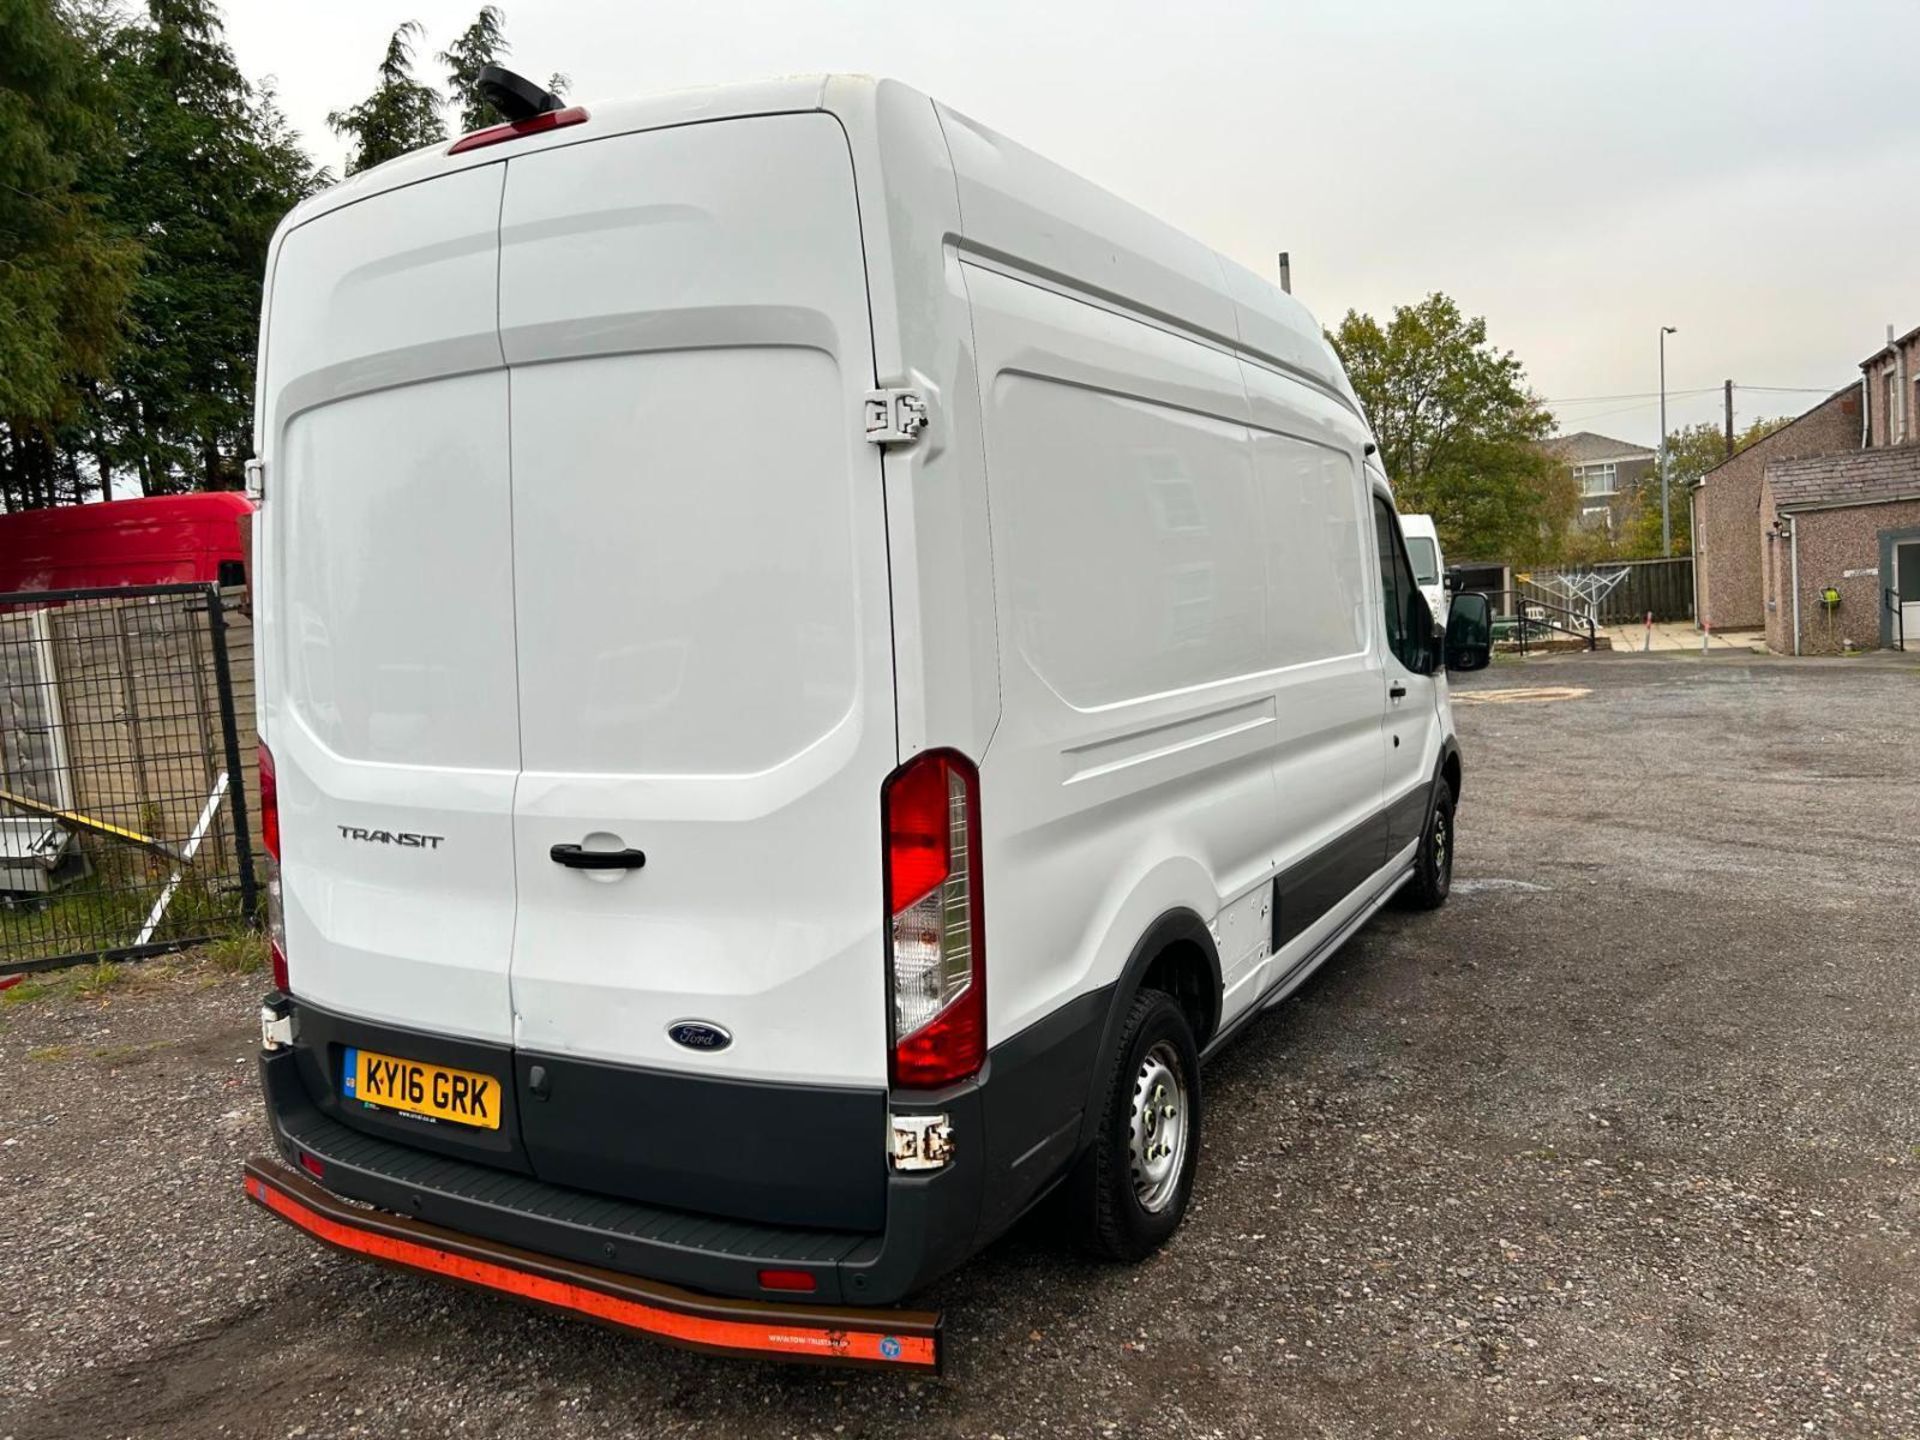 >>>SPECIAL CLEARANCE<<< RELIABLE WORKHORSE: 2016 FORD TRANSIT 2.2 TDCI L3 H3 PANEL VAN - Image 12 of 12